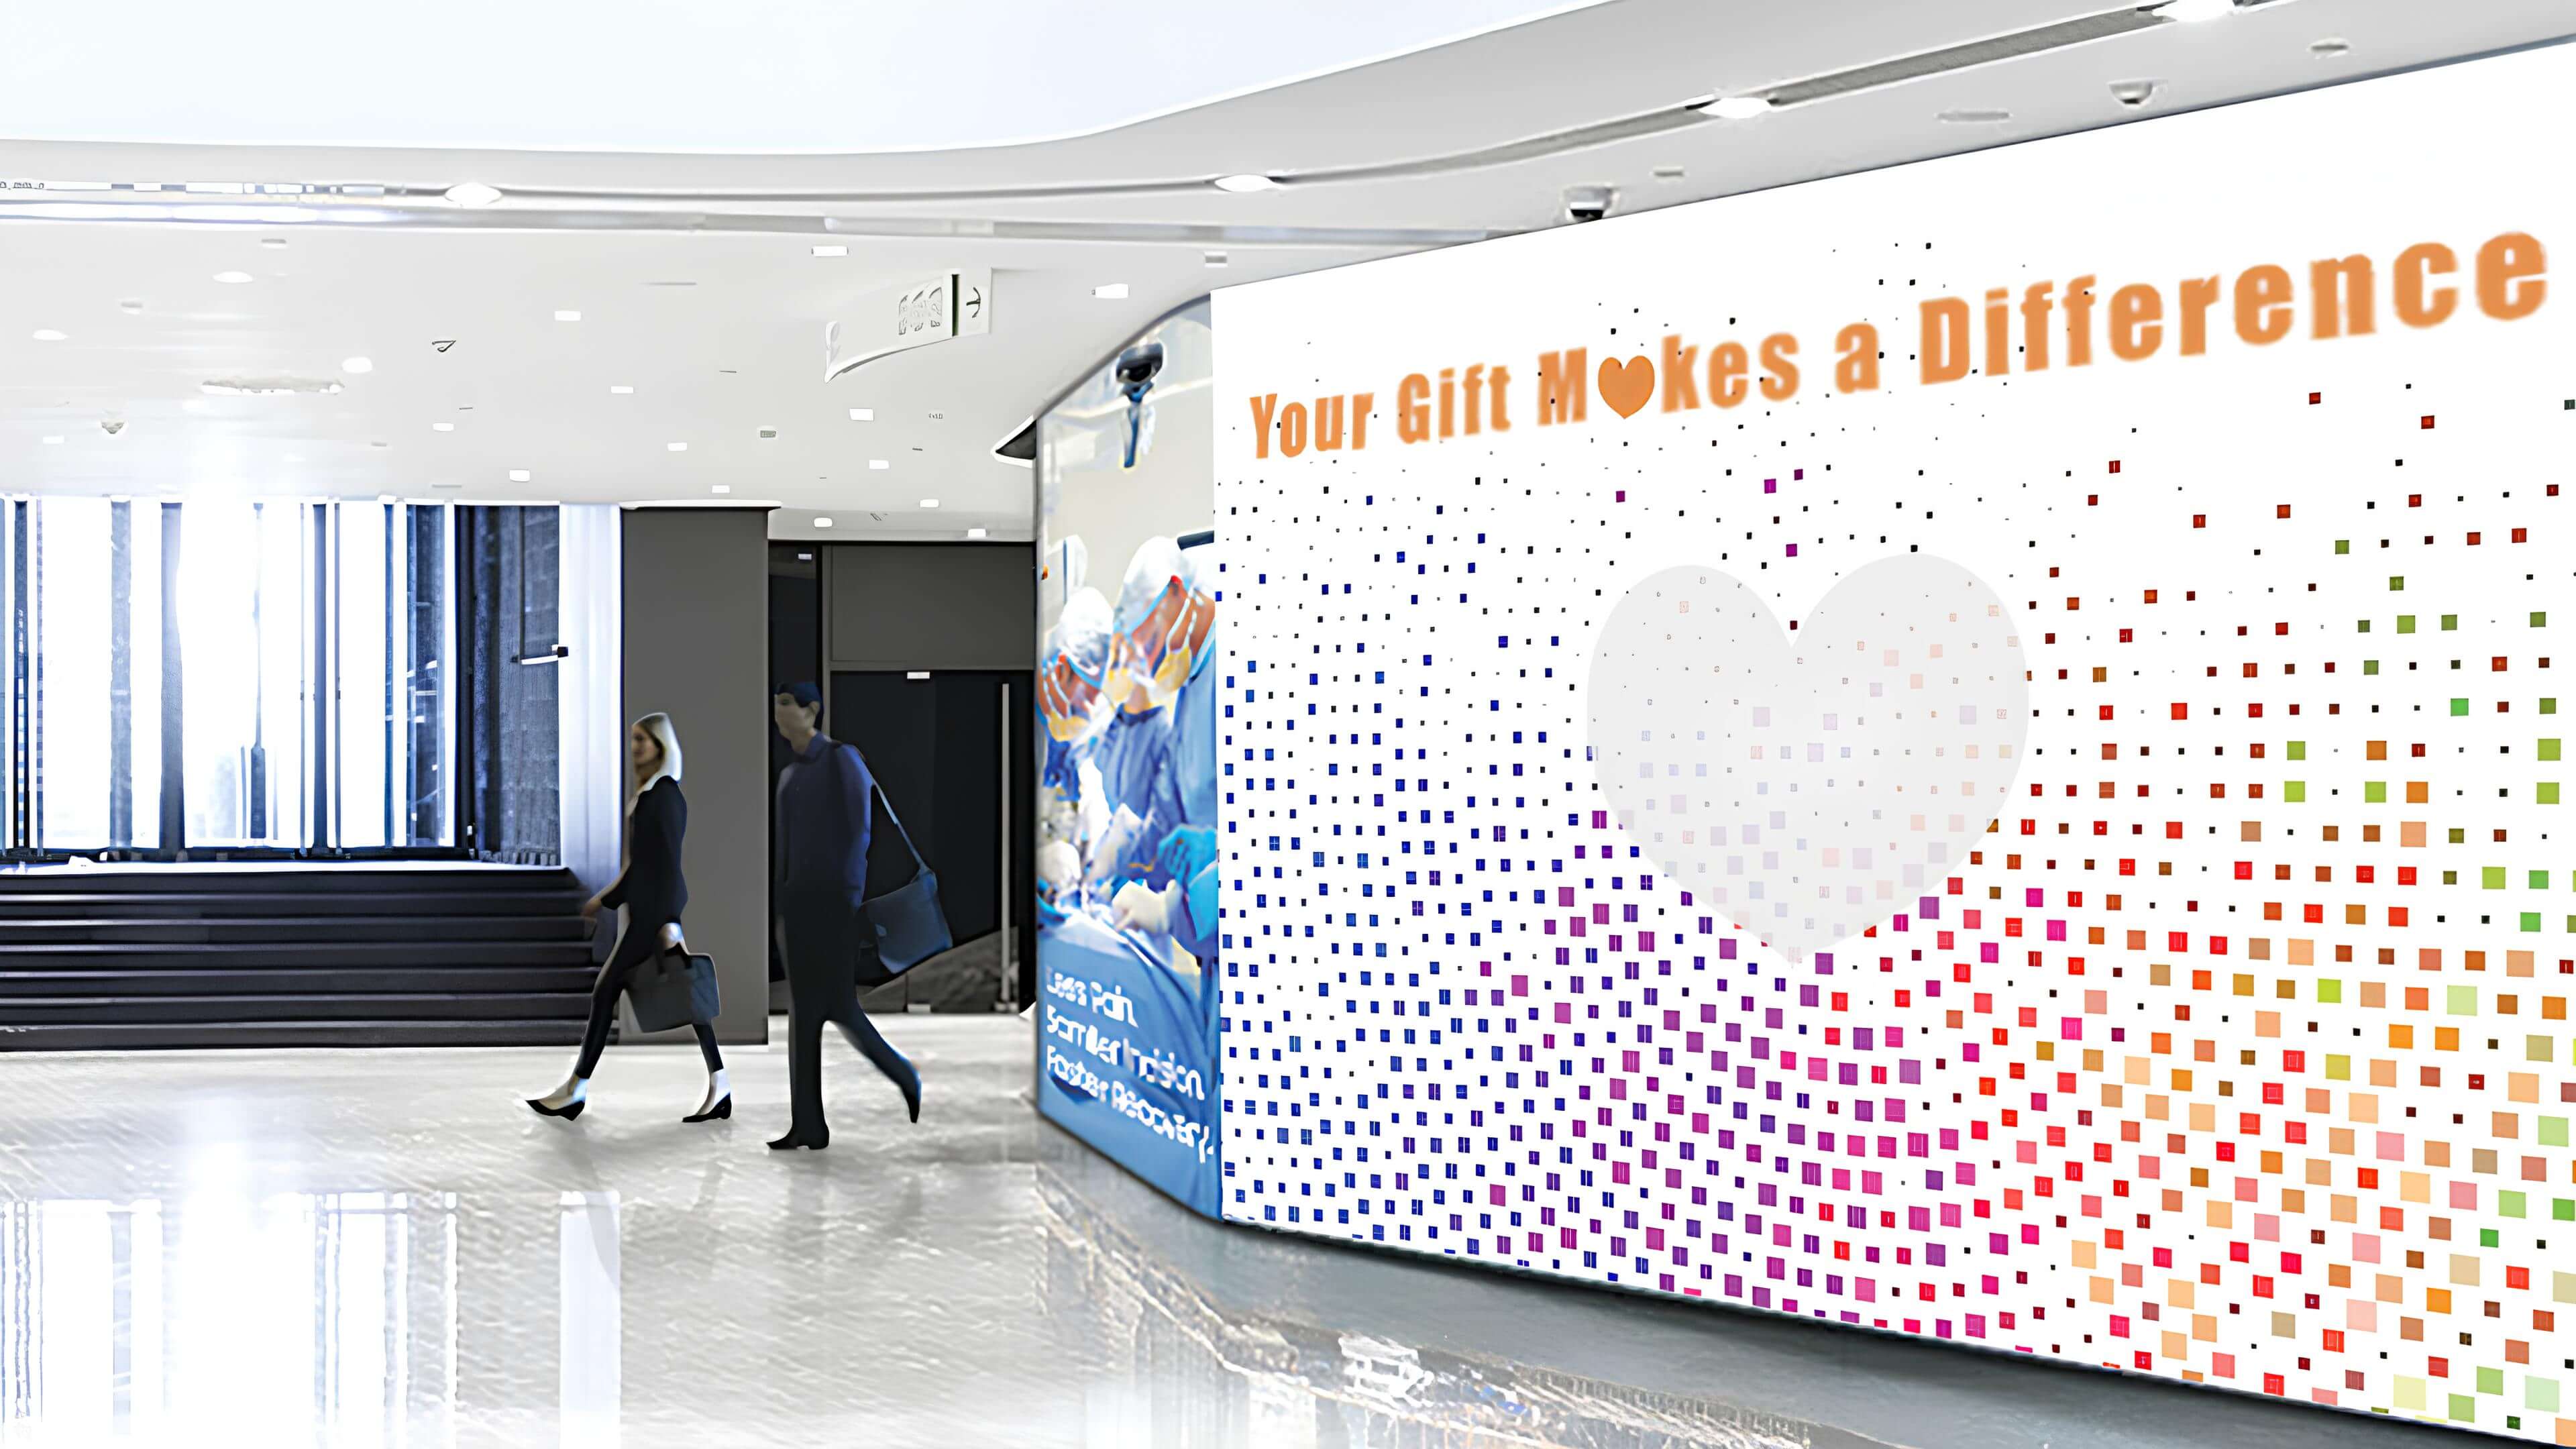 Digital signage wall reminding people to donate for a good cause.